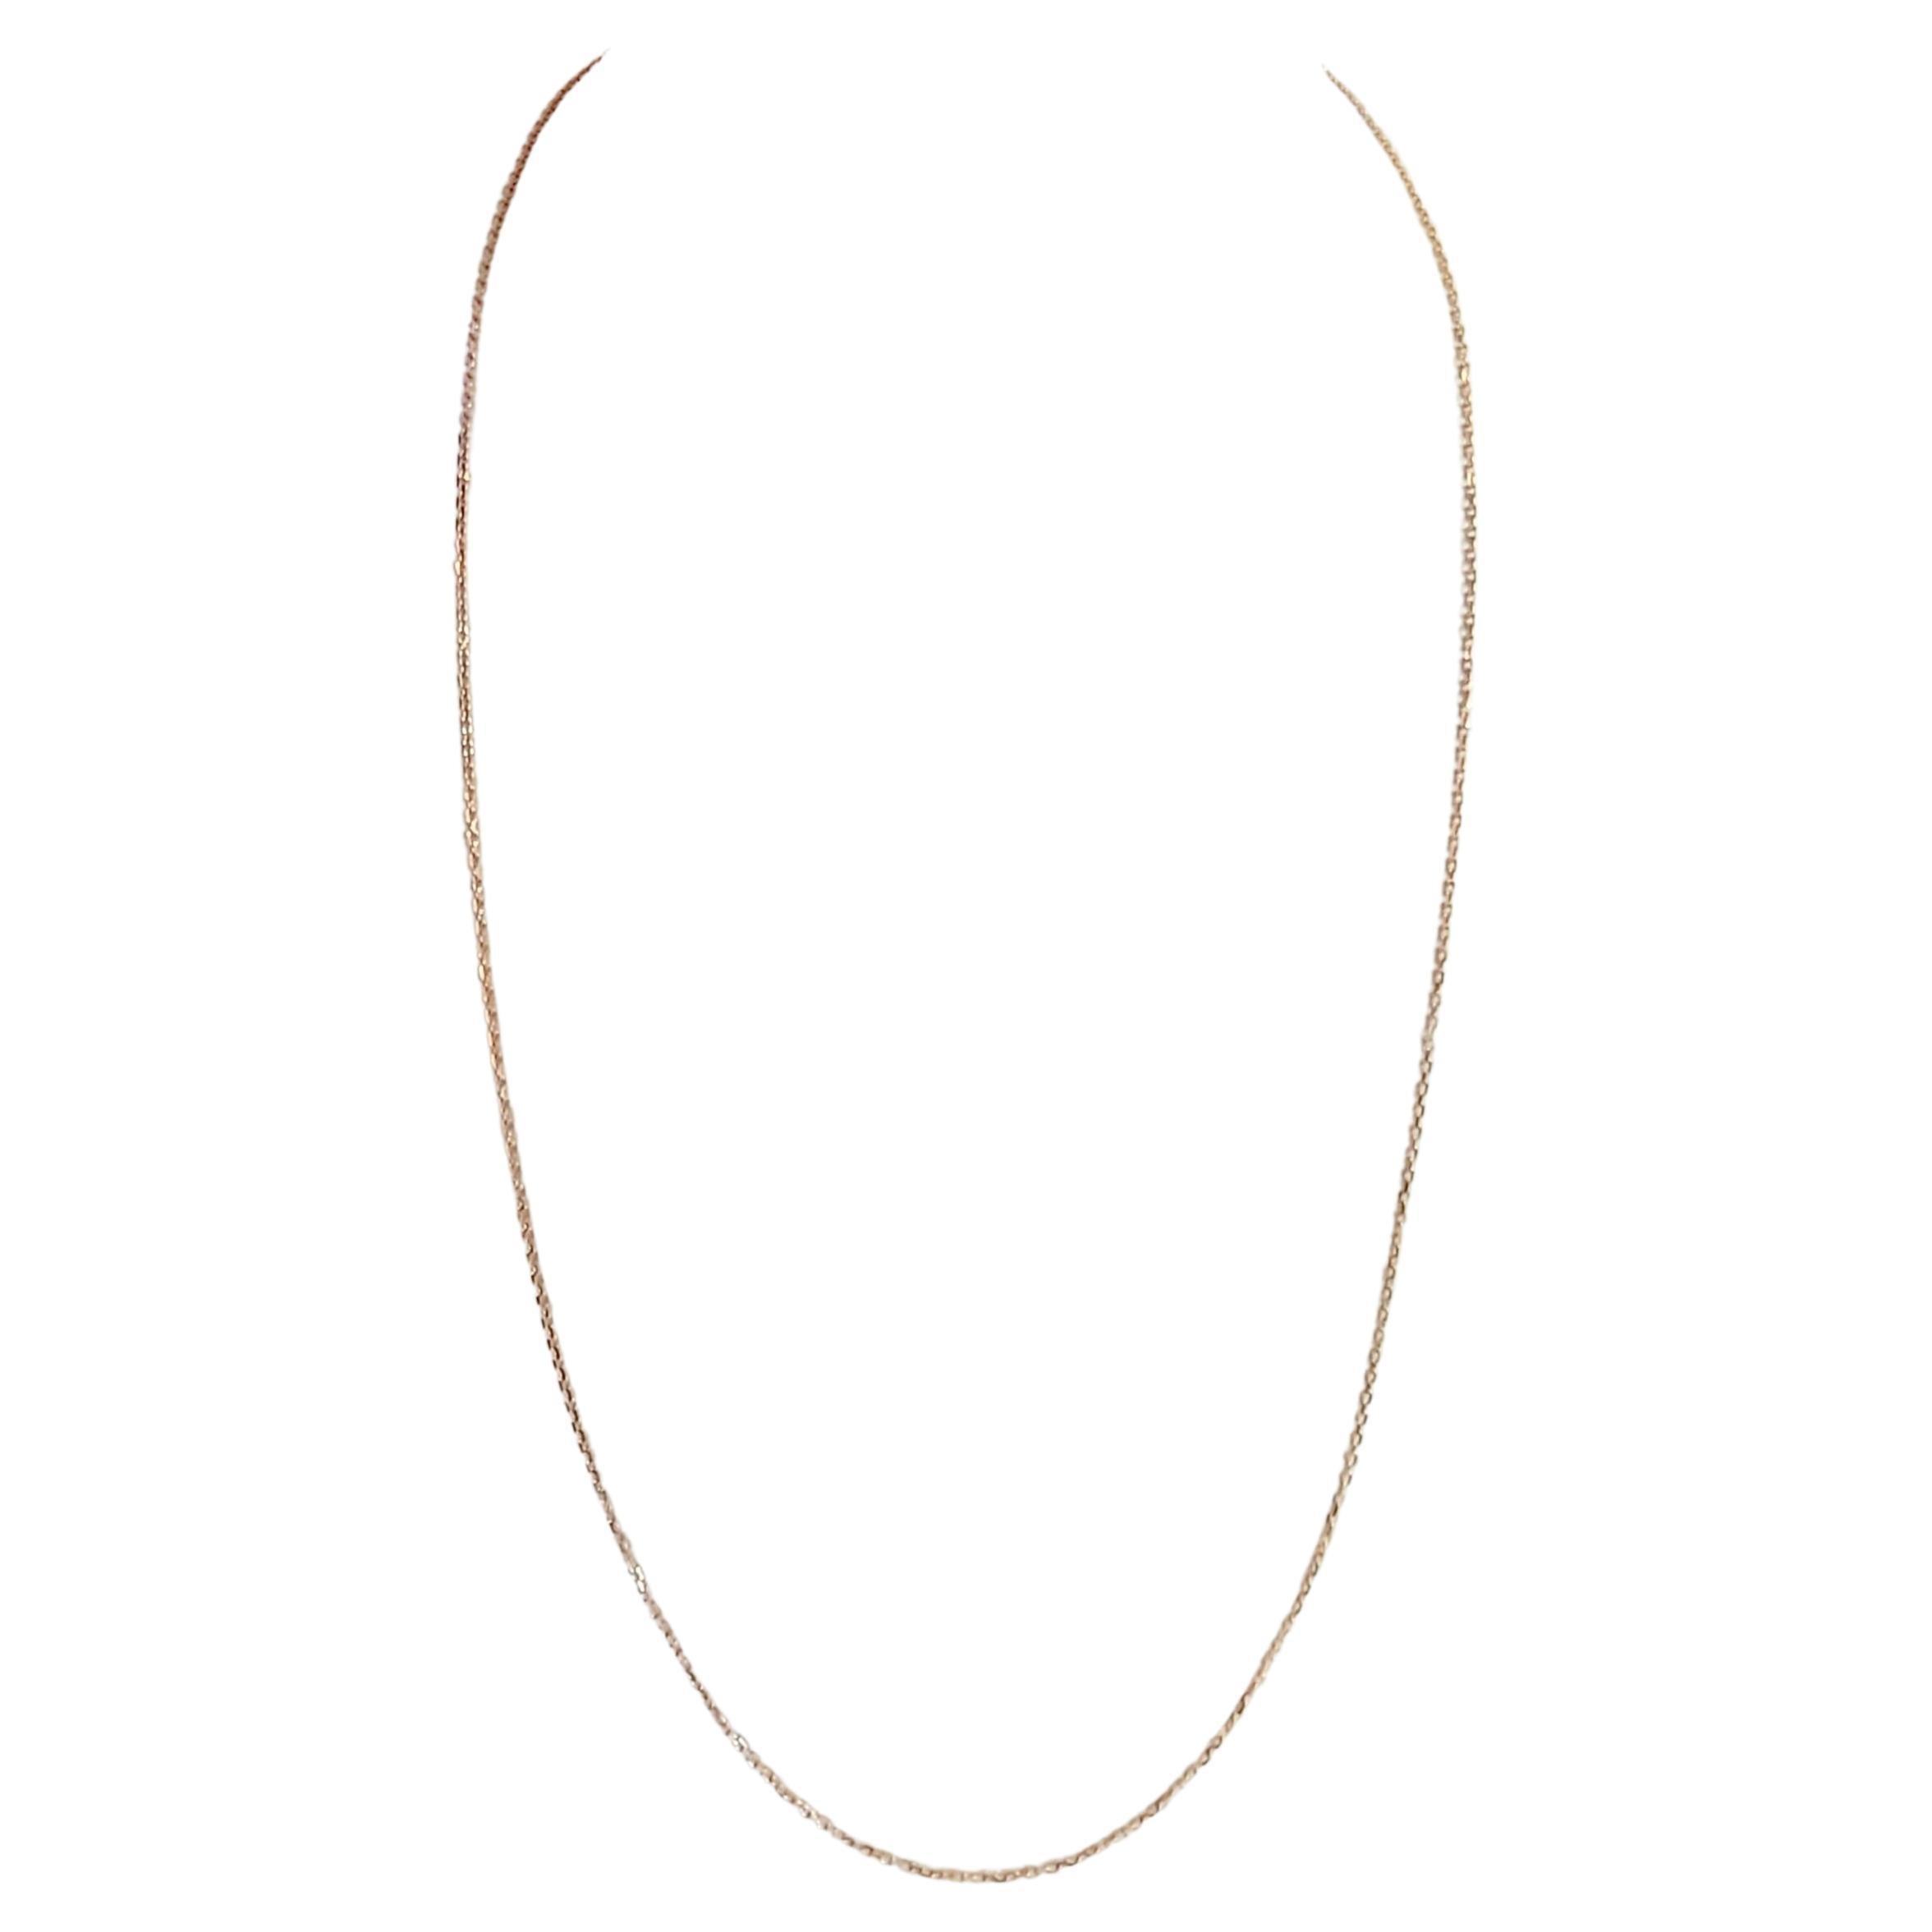 Tiffany & Co. 18K Rose Gold Chain 20''